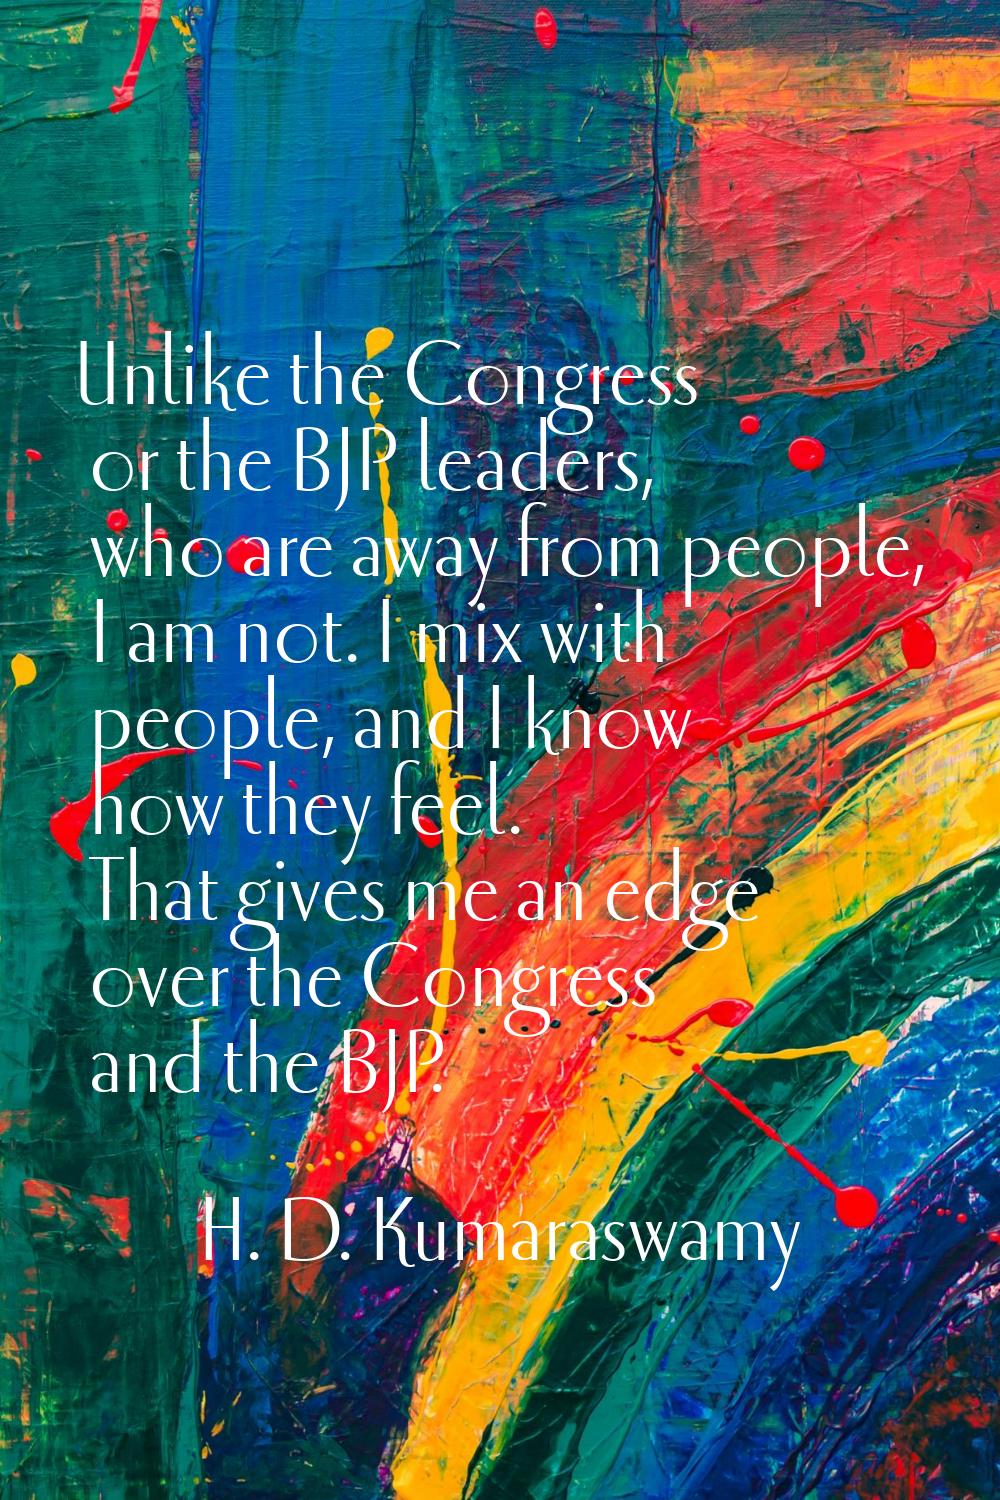 Unlike the Congress or the BJP leaders, who are away from people, I am not. I mix with people, and 